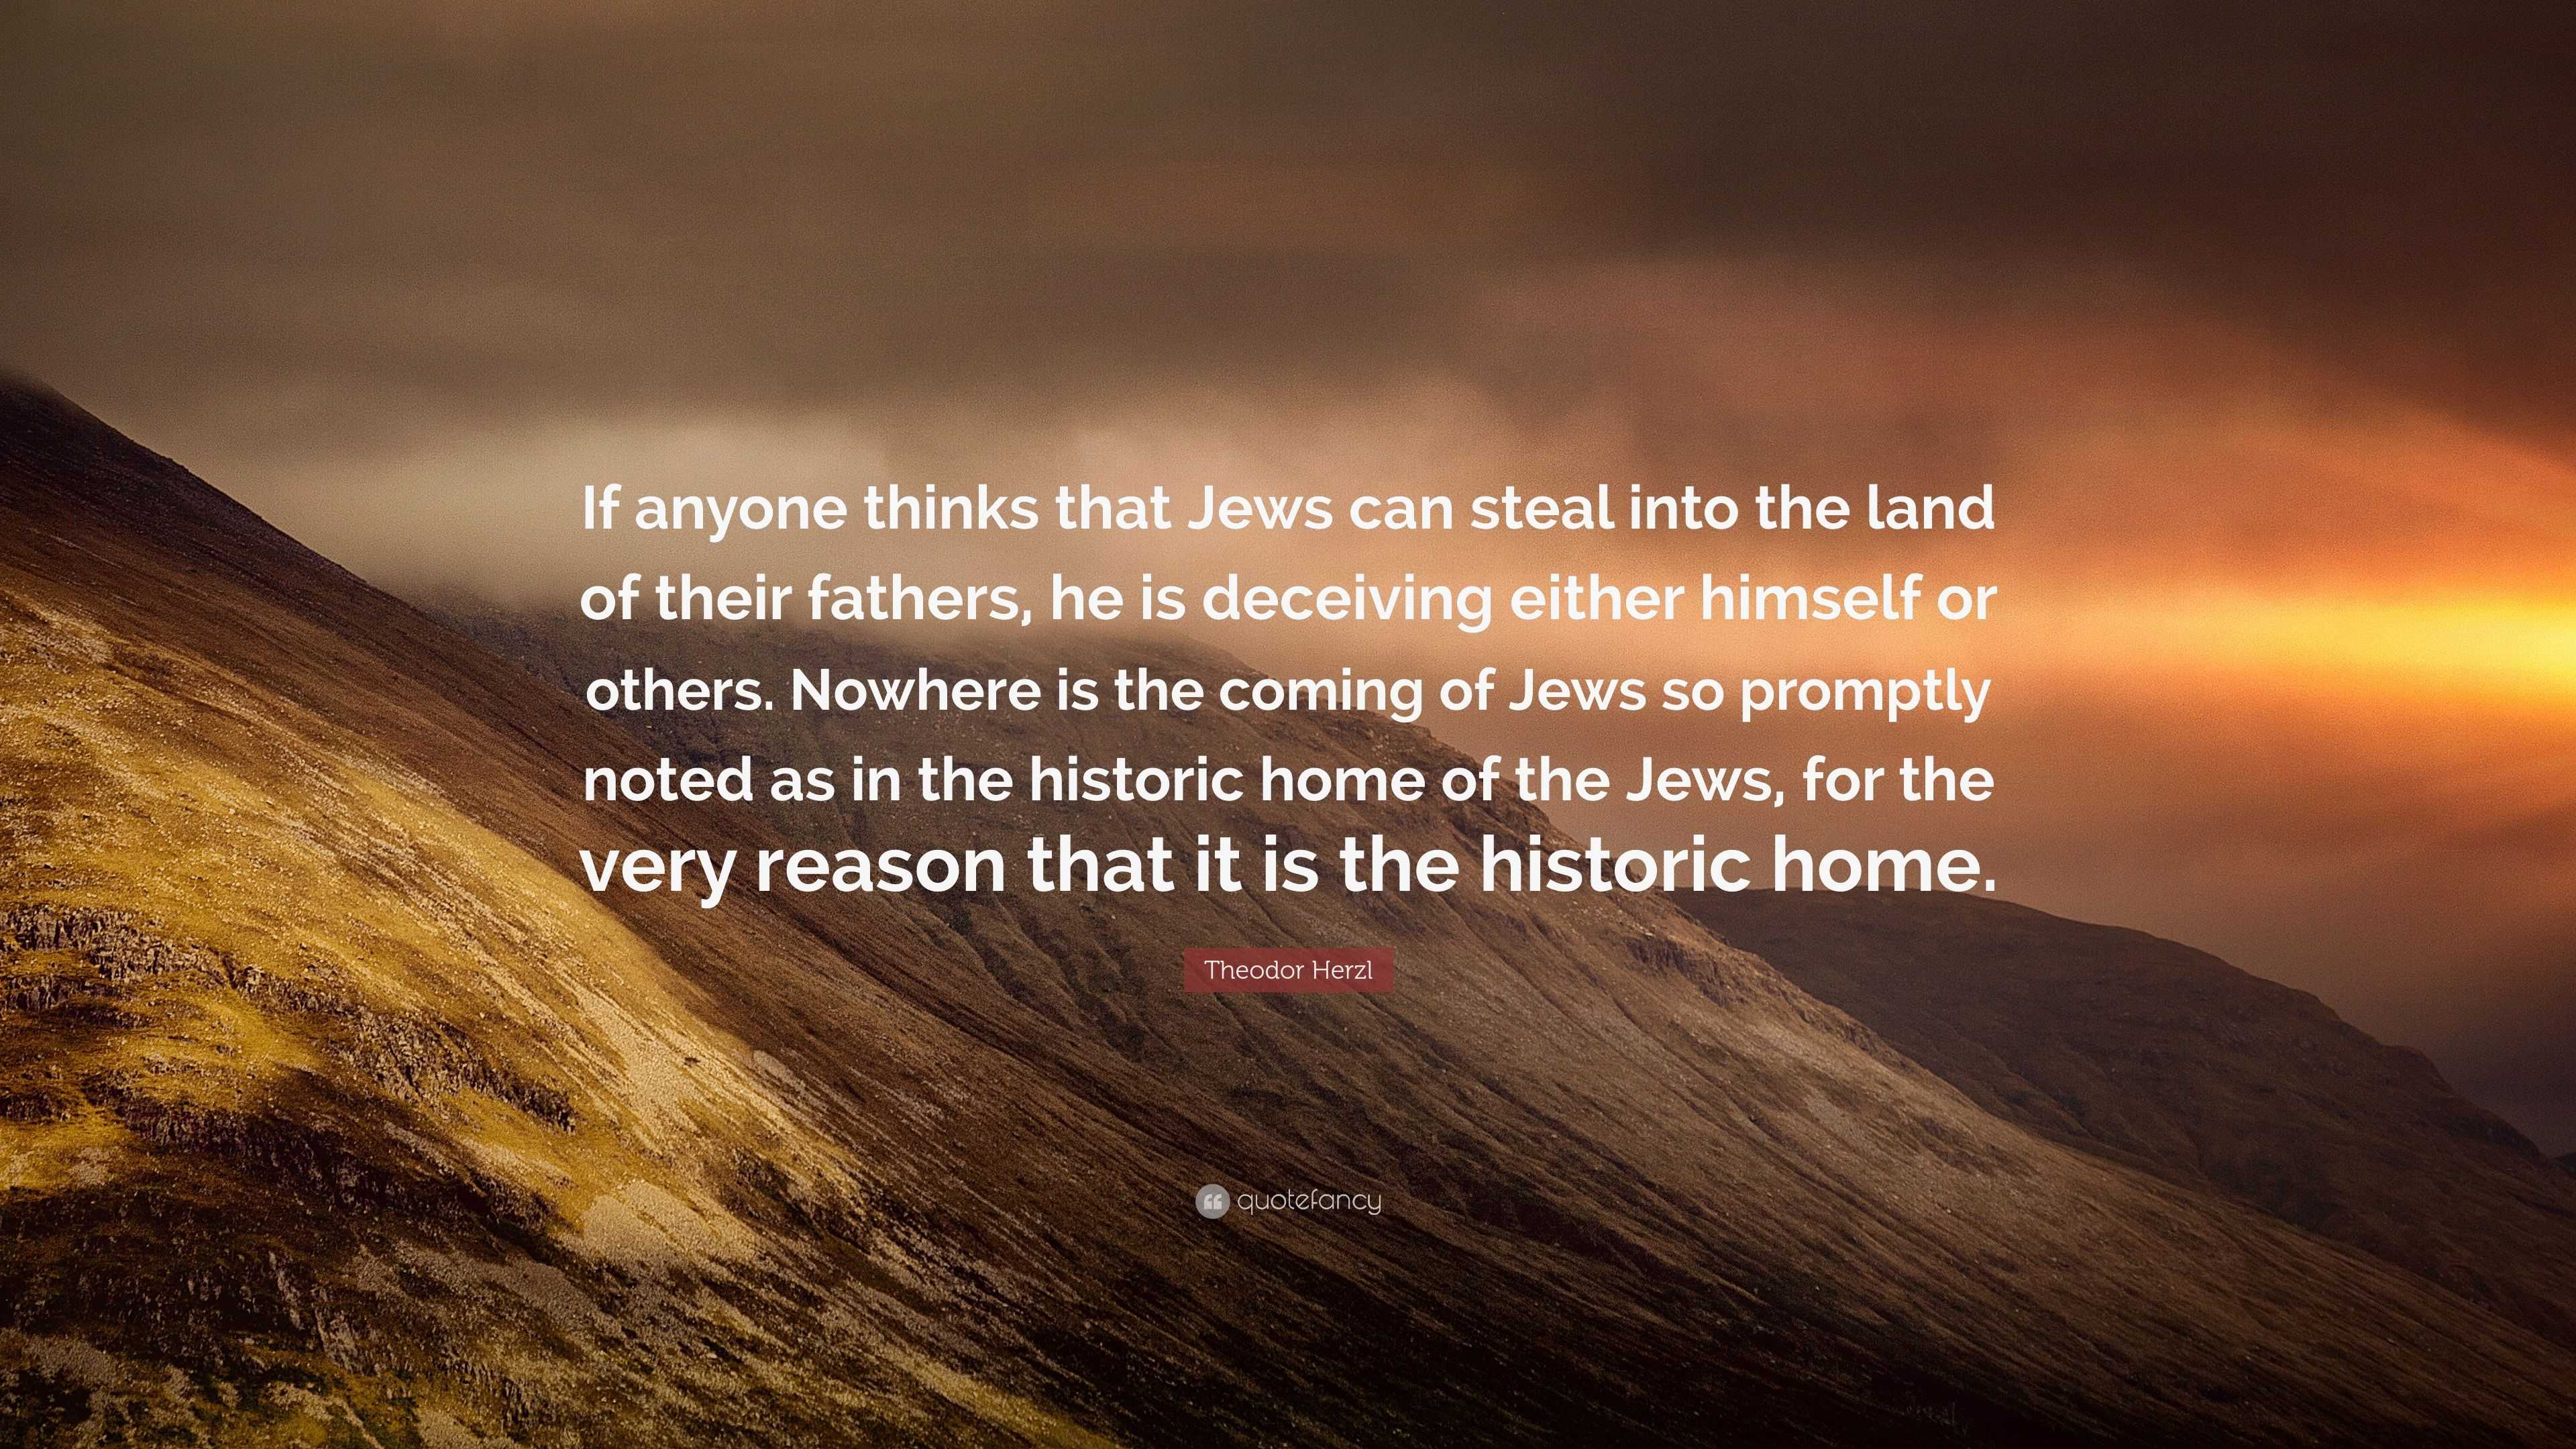 Theodor Herzl Quote: “If anyone thinks that Jews can steal into the ...